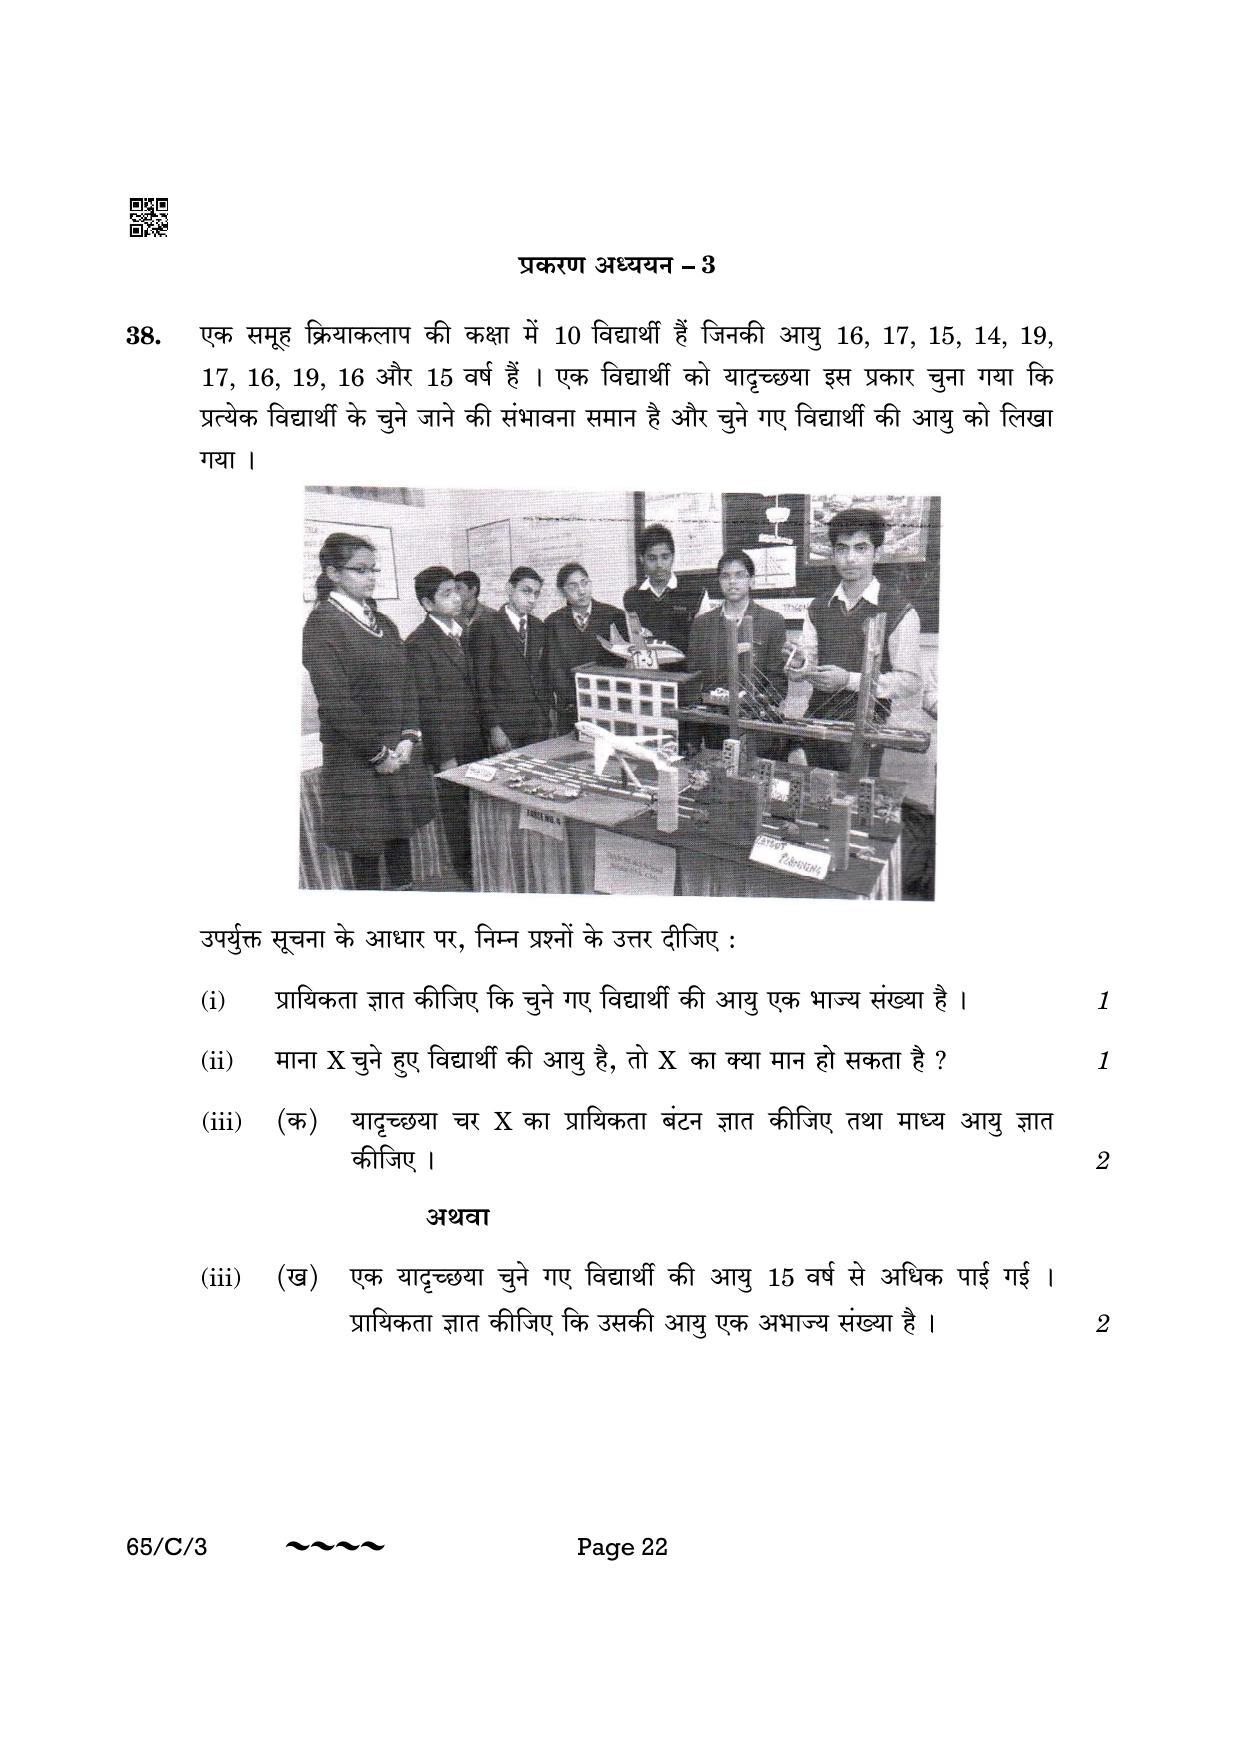 CBSE Class 12 65-3- Mathematics 2023 (Compartment) Question Paper - Page 22